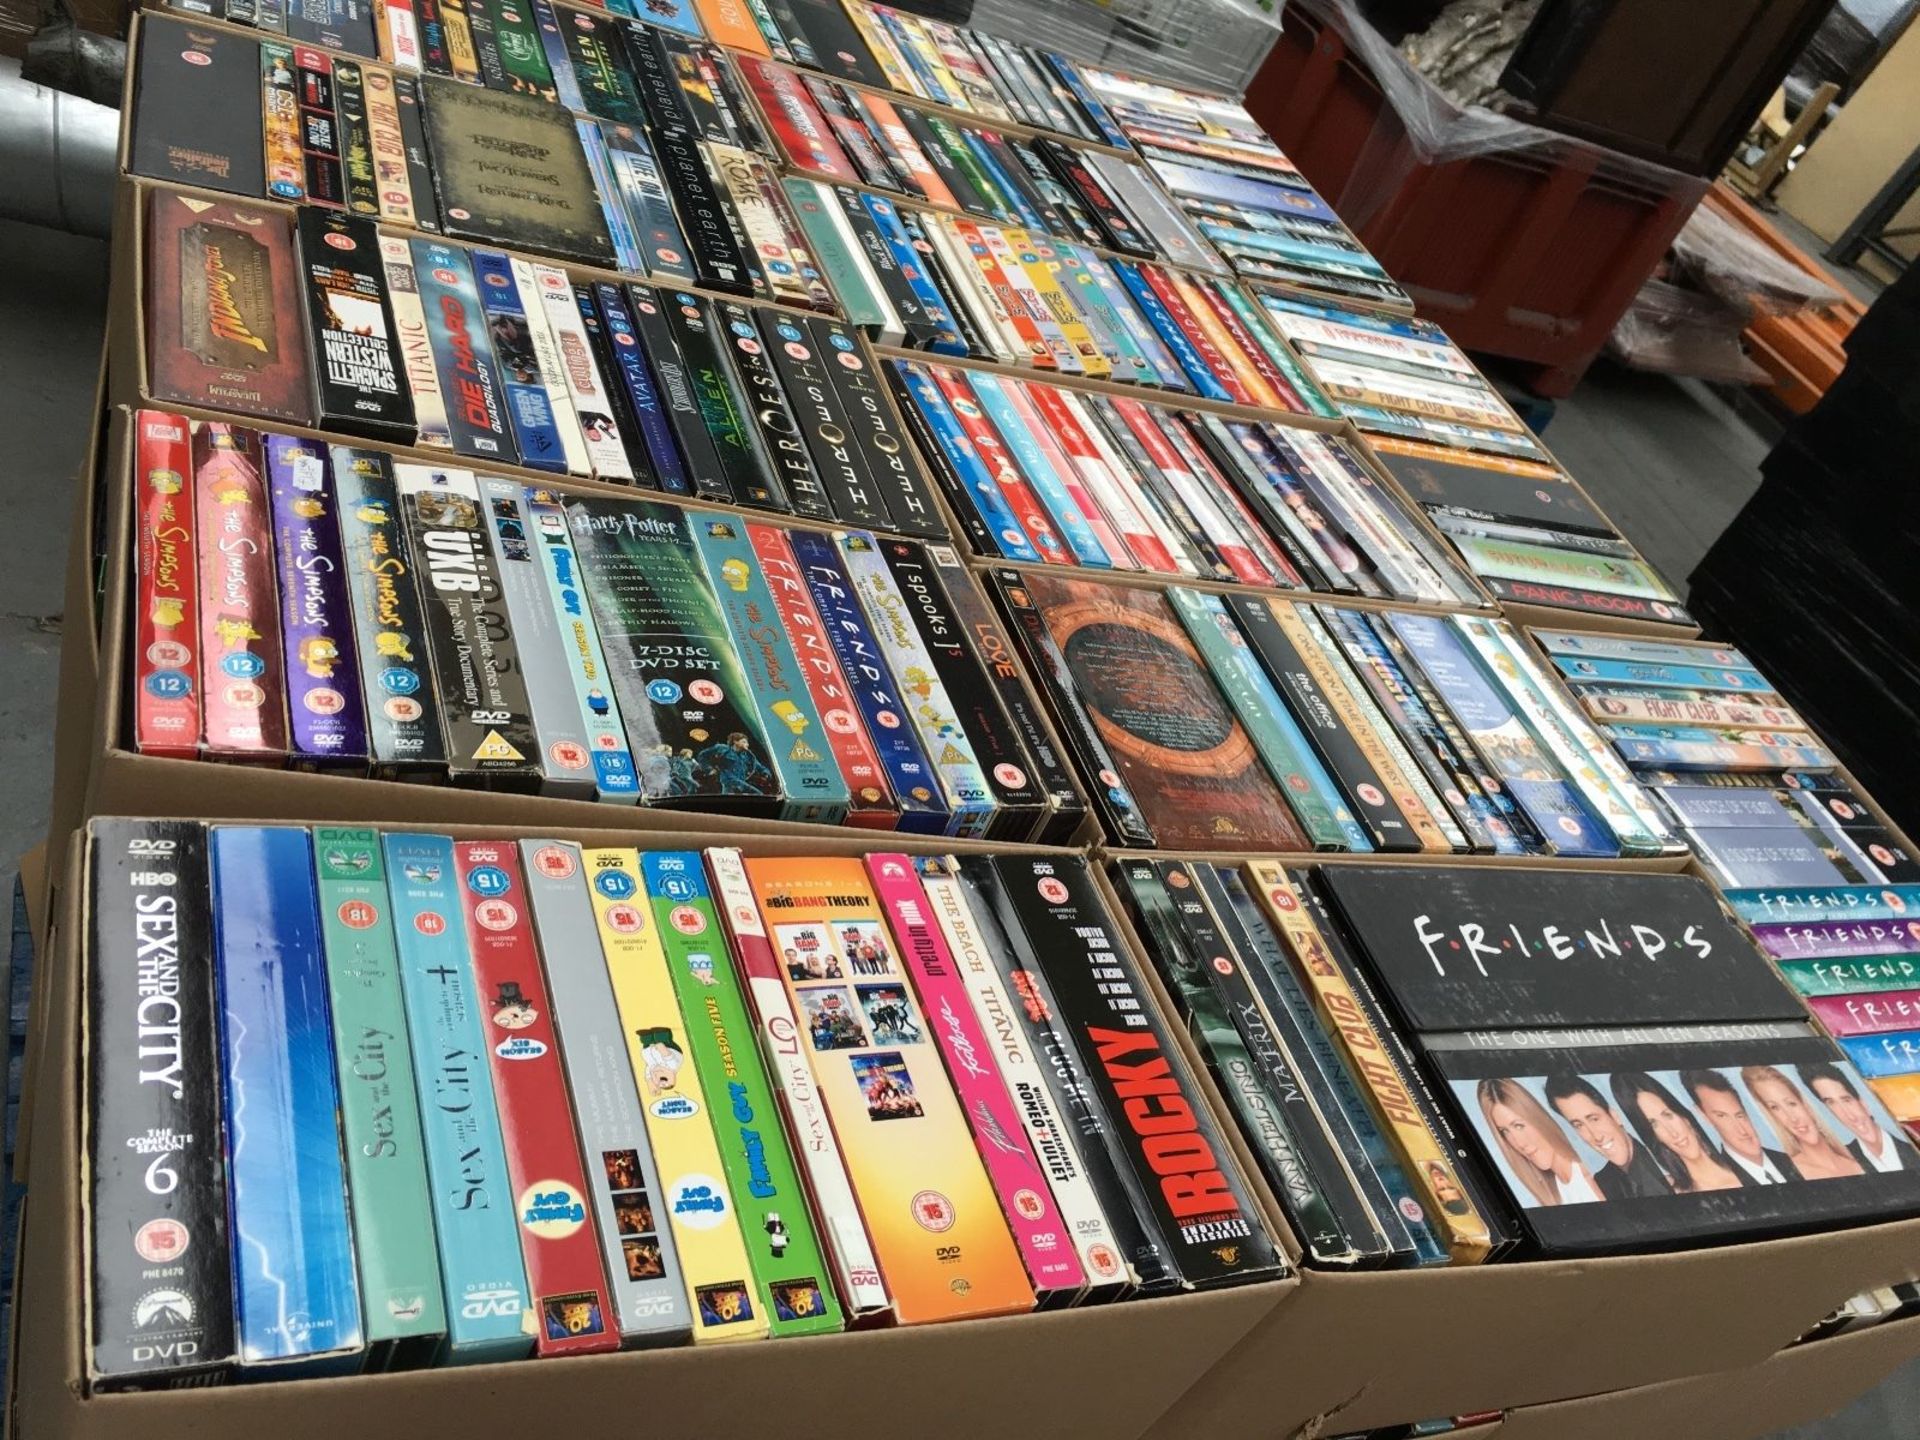 JOB LOT OF 100 x VARIOUS DVD'S - REGION 2 - USED - GOOD ASSORTMENT OF TITLES - NO RESERVE